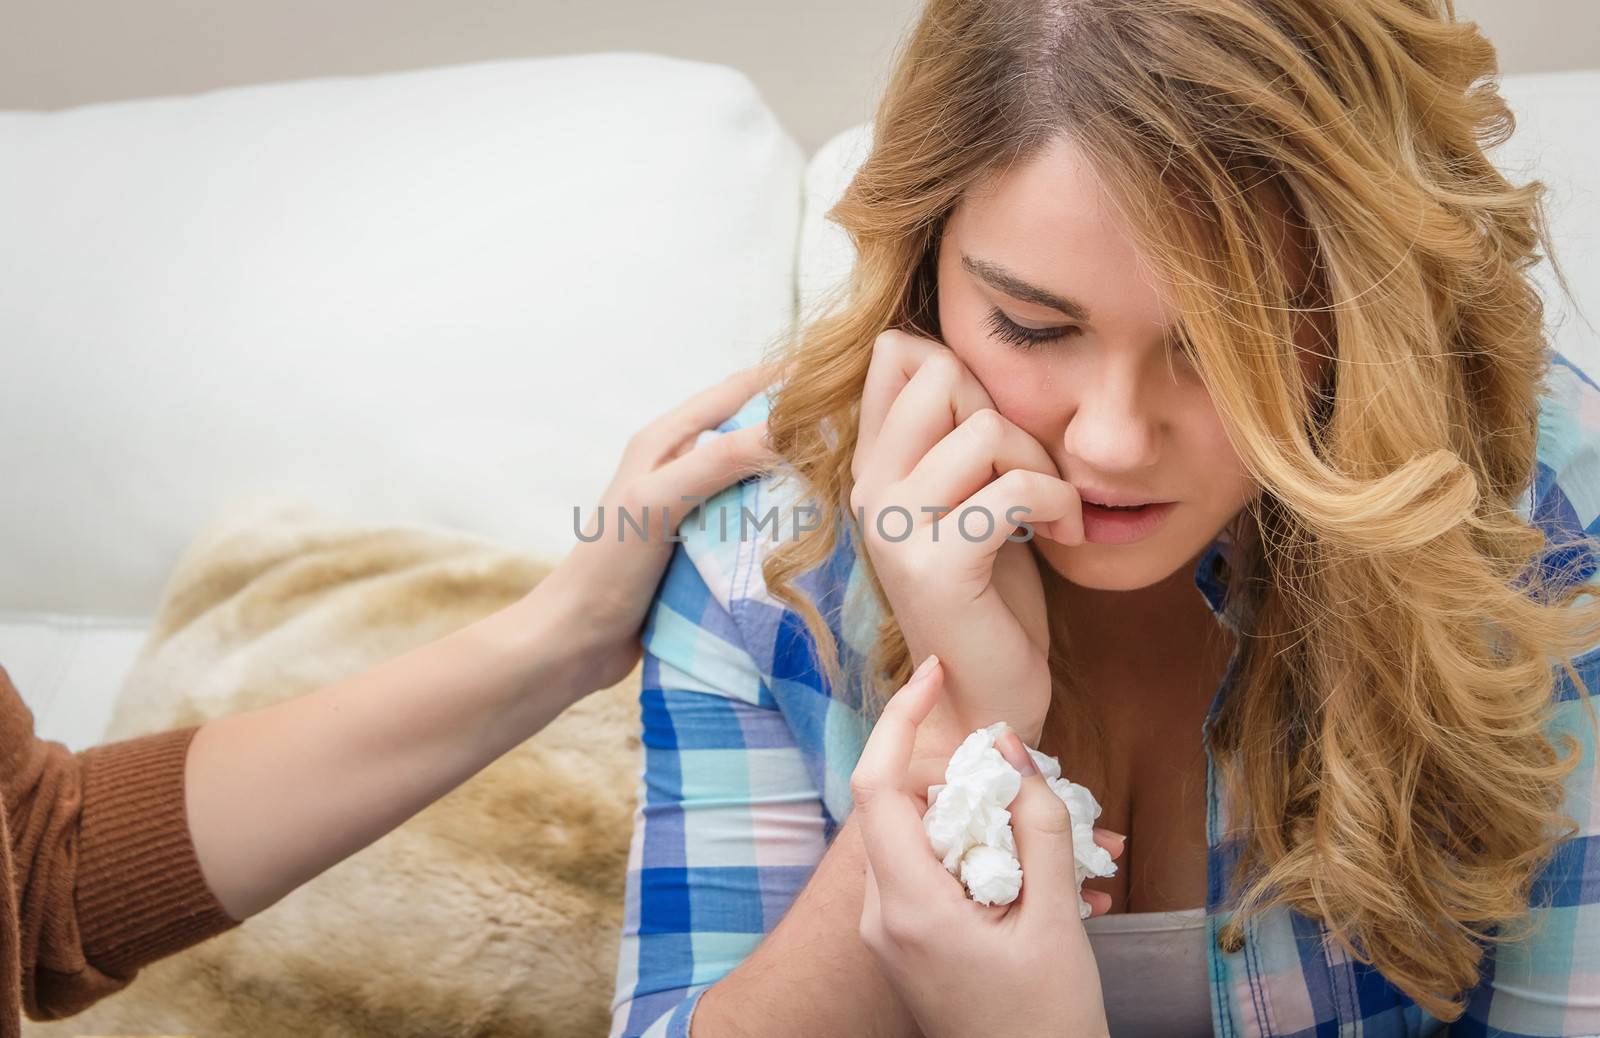 Hands of mother consoling sad teen daughter crying by doble.d